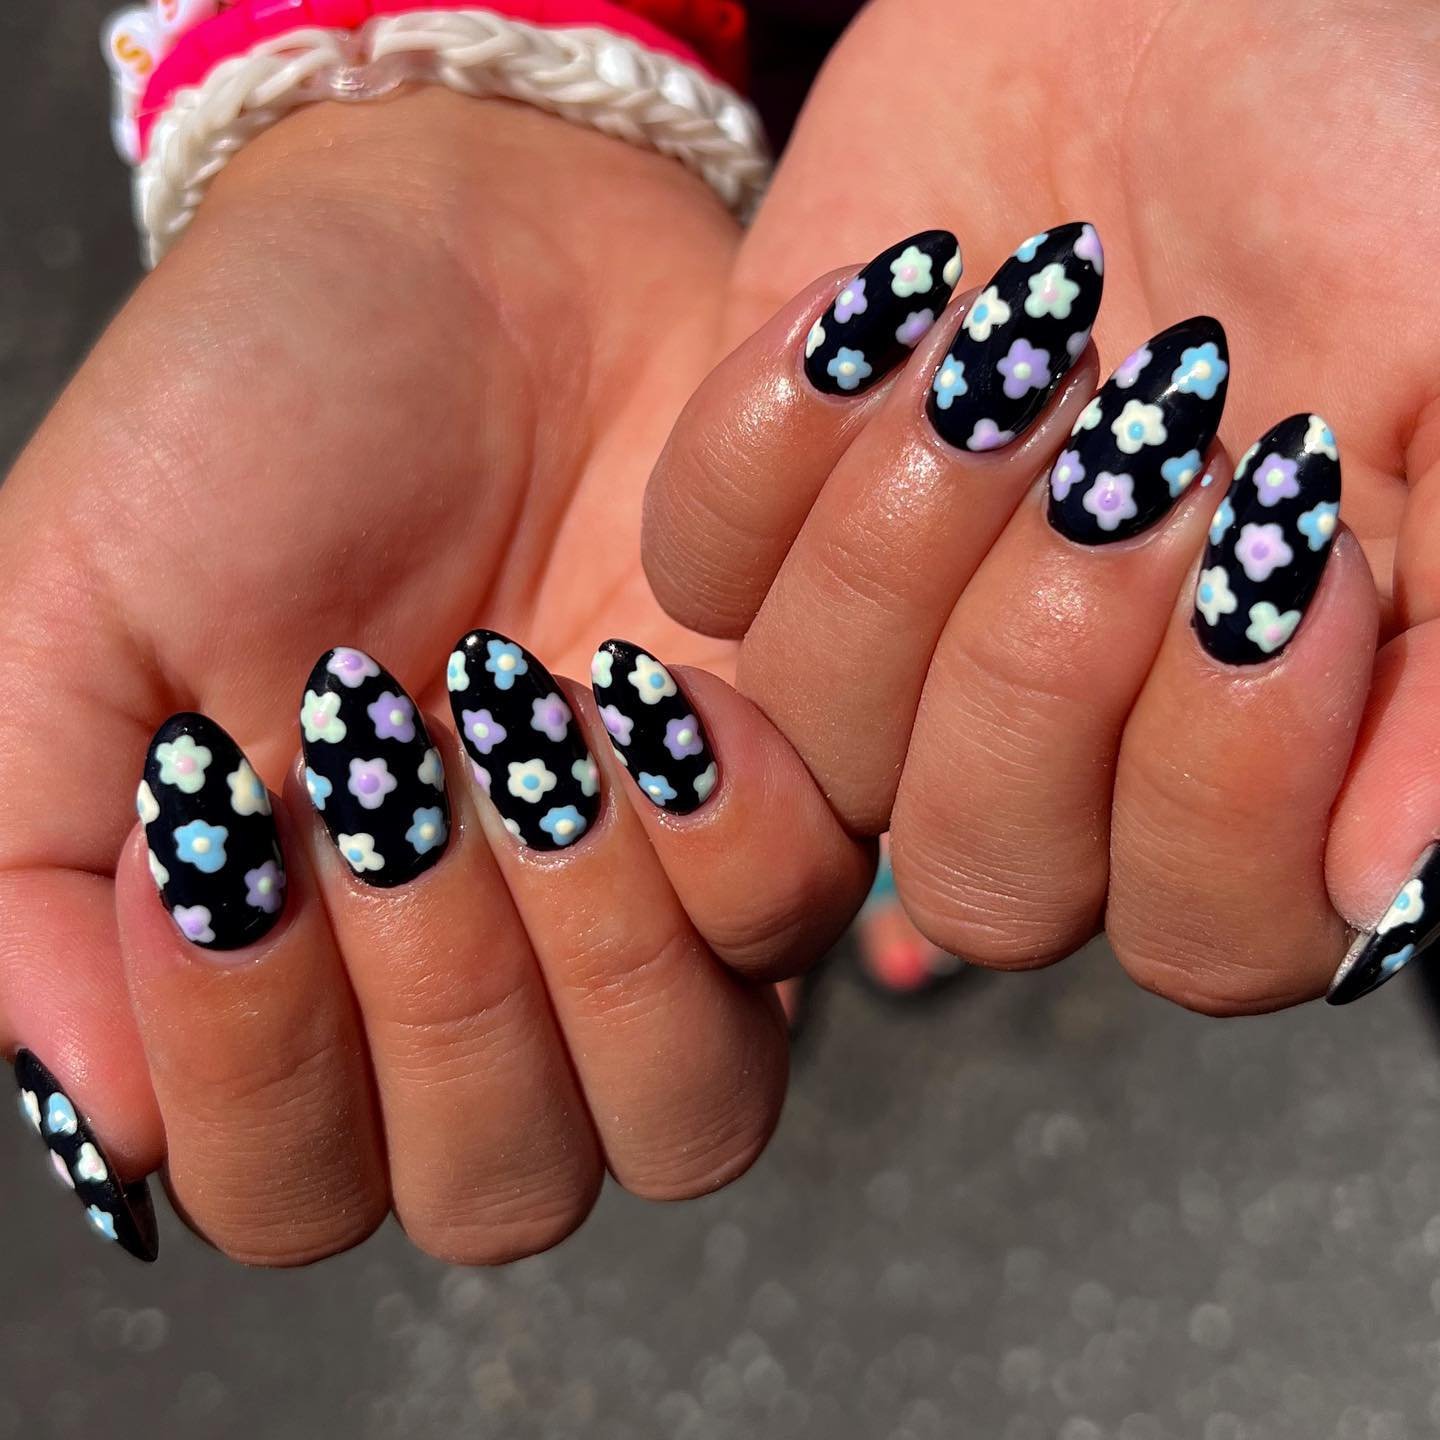 27 - Picture of Black Nails